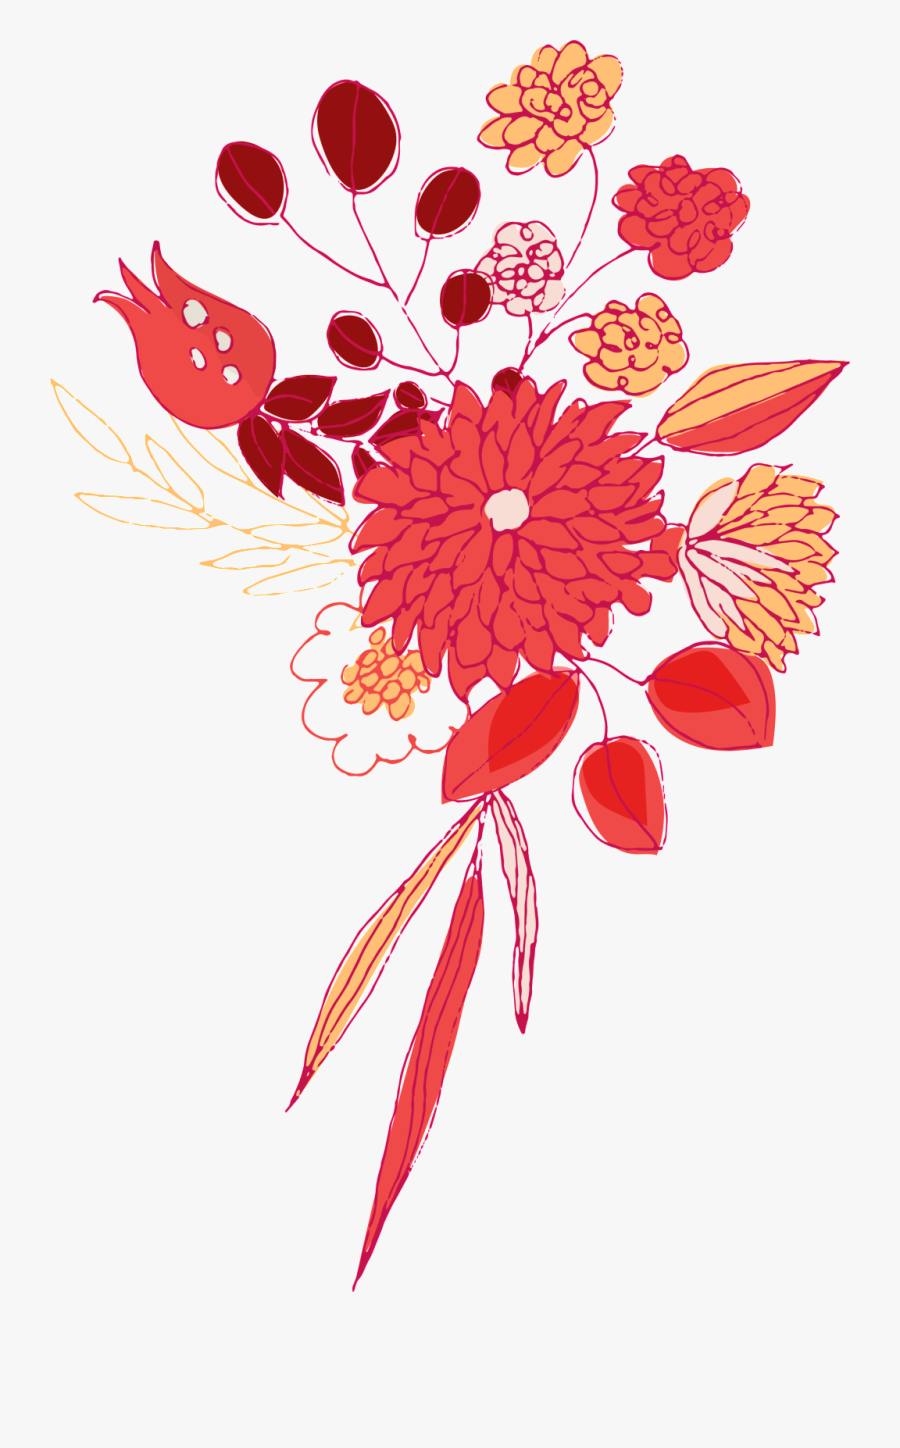 Transparent Drawn Flower Png - Hand Drawn Red Flower Png, Transparent Clipart